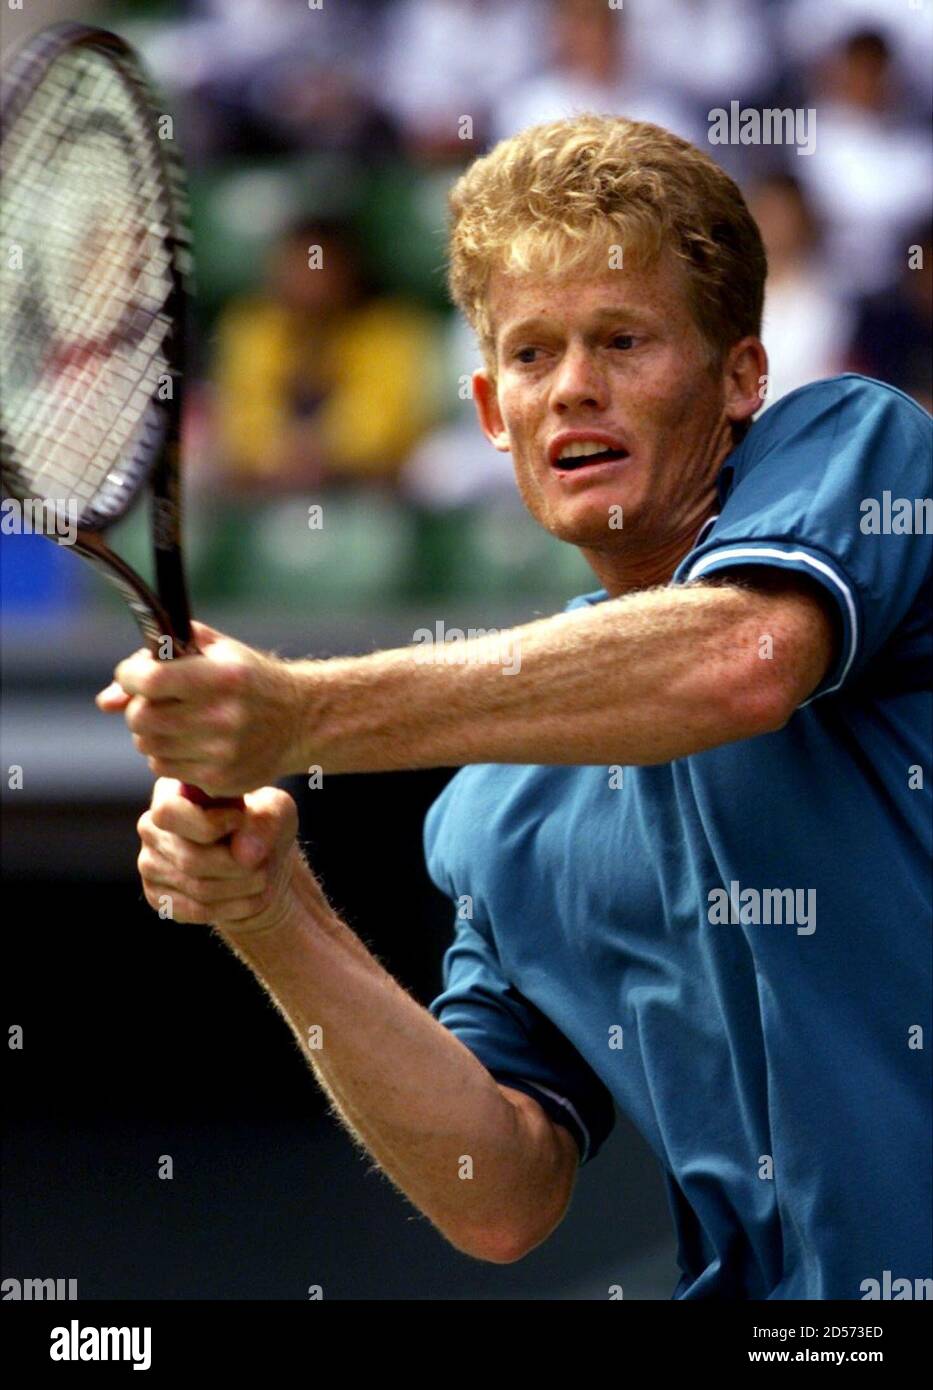 Wayne Ferreira of South Africa returns a backhand against Thomas Johansson  of Sweden during the men's singles semifinals of the Japan Open tennis in  Tokyo April 17. Ferreira beat Johansson 6-3 6-2